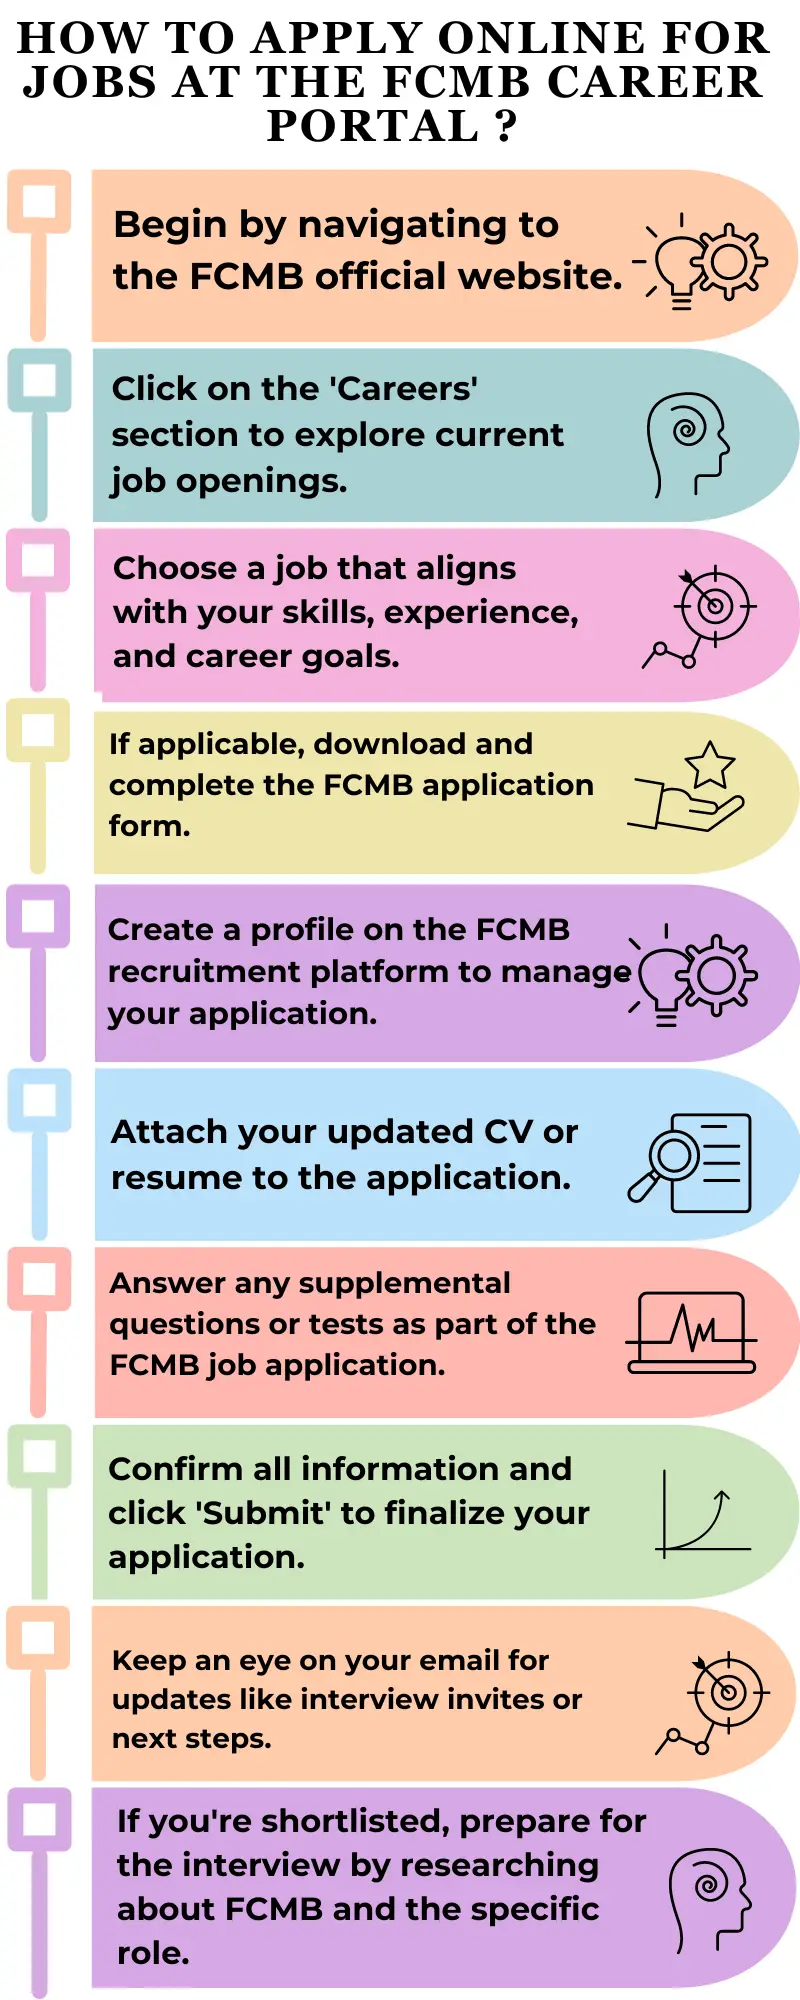 How to Apply Online for Jobs at the FCMB Career Portal ?